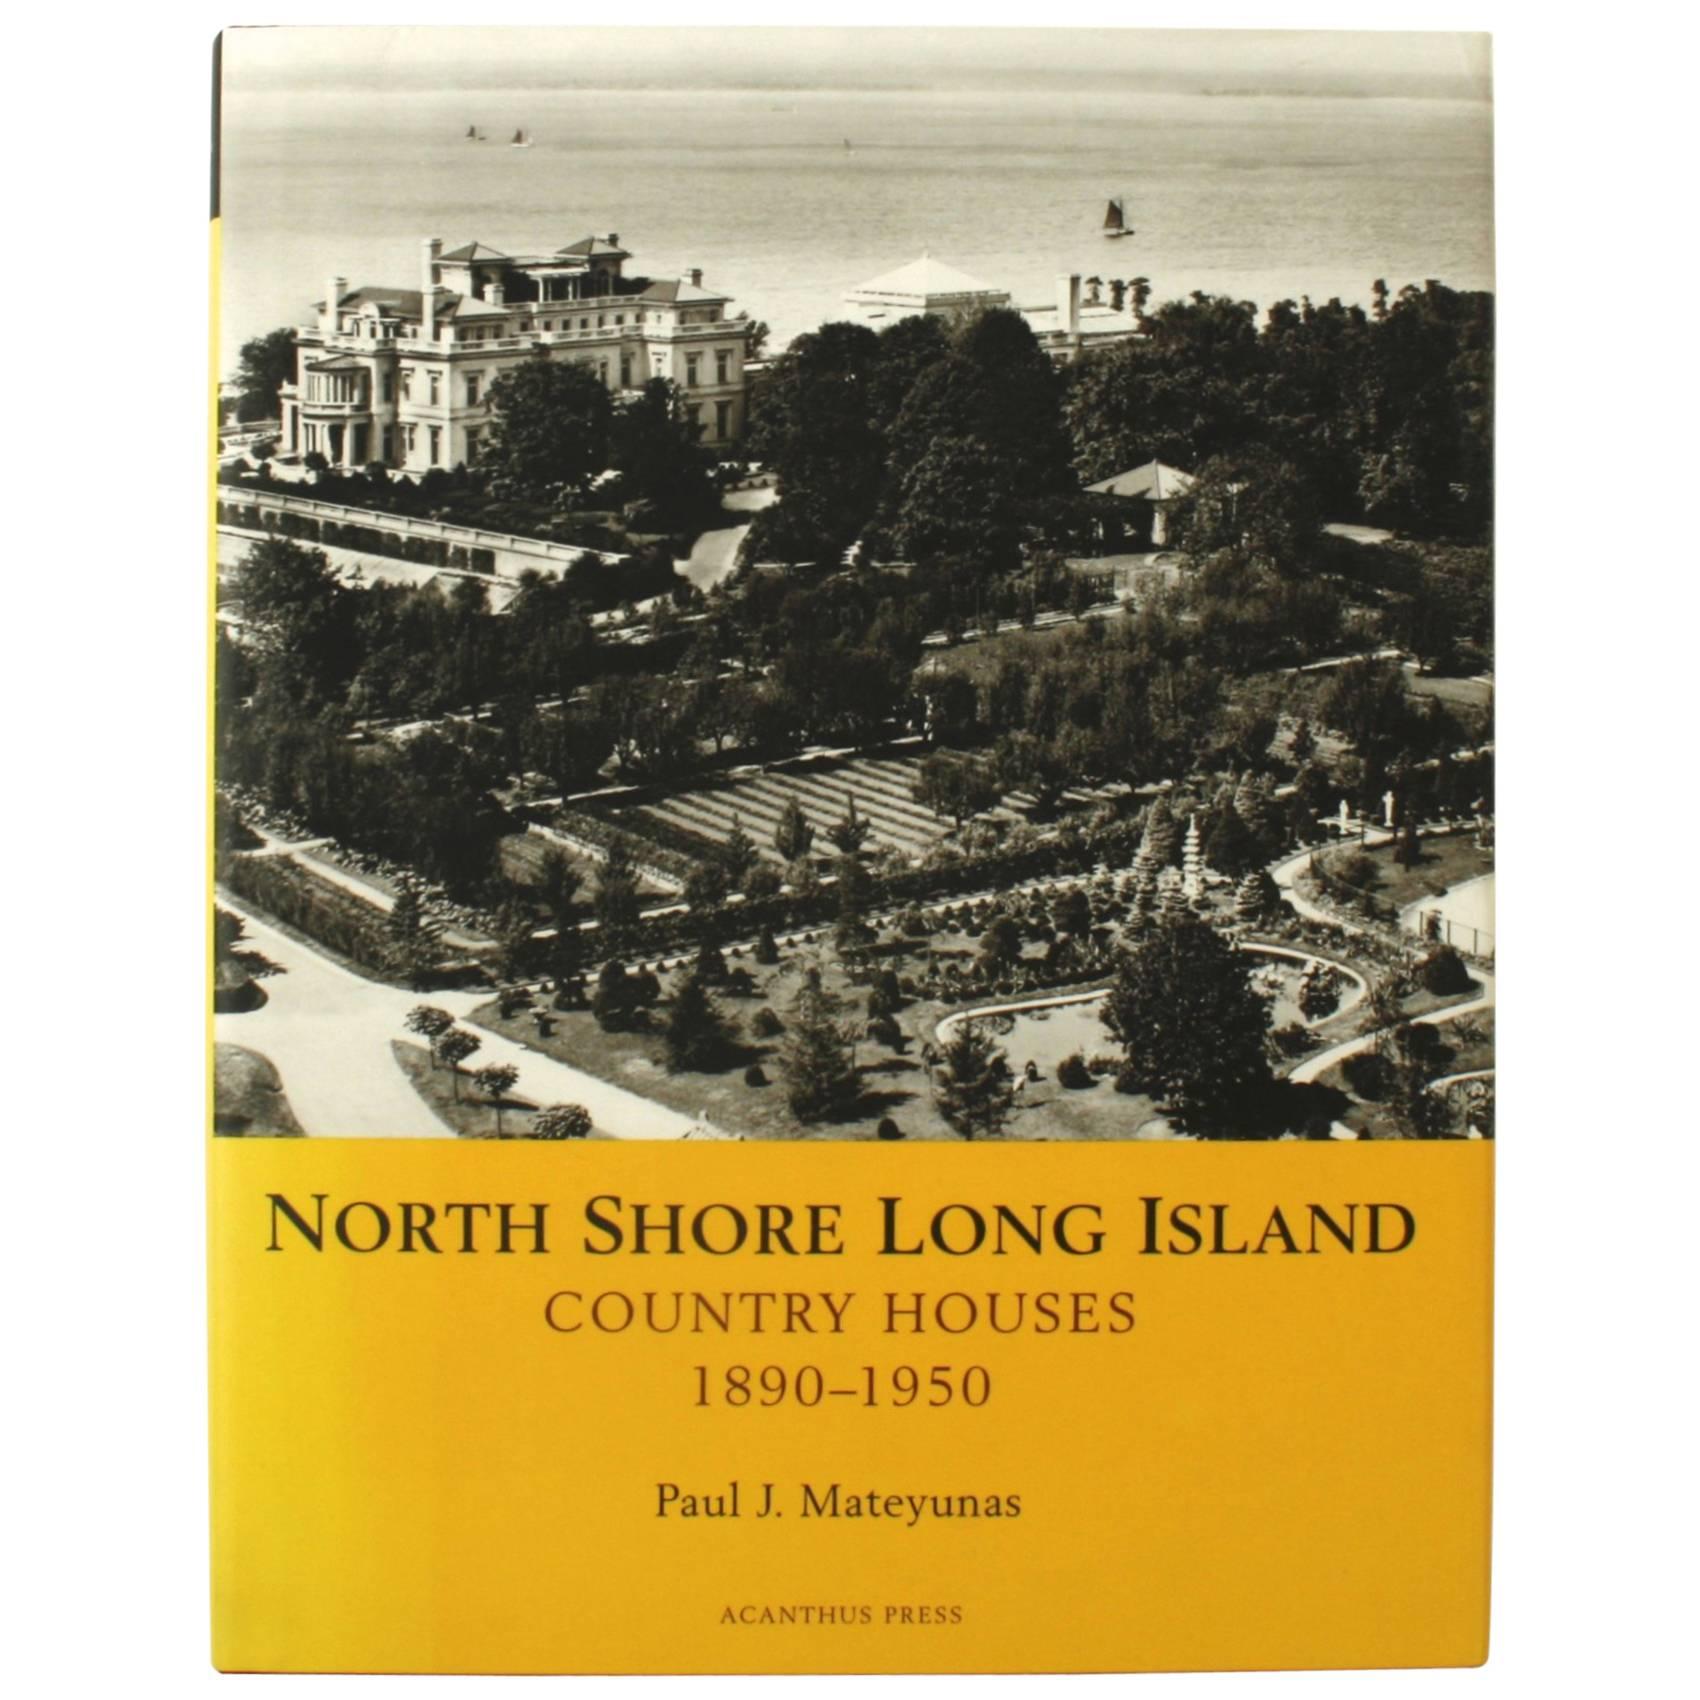 North Shore Long Island Country Houses, 1890-1950, 1st Ed by Paul J. Mateyunas